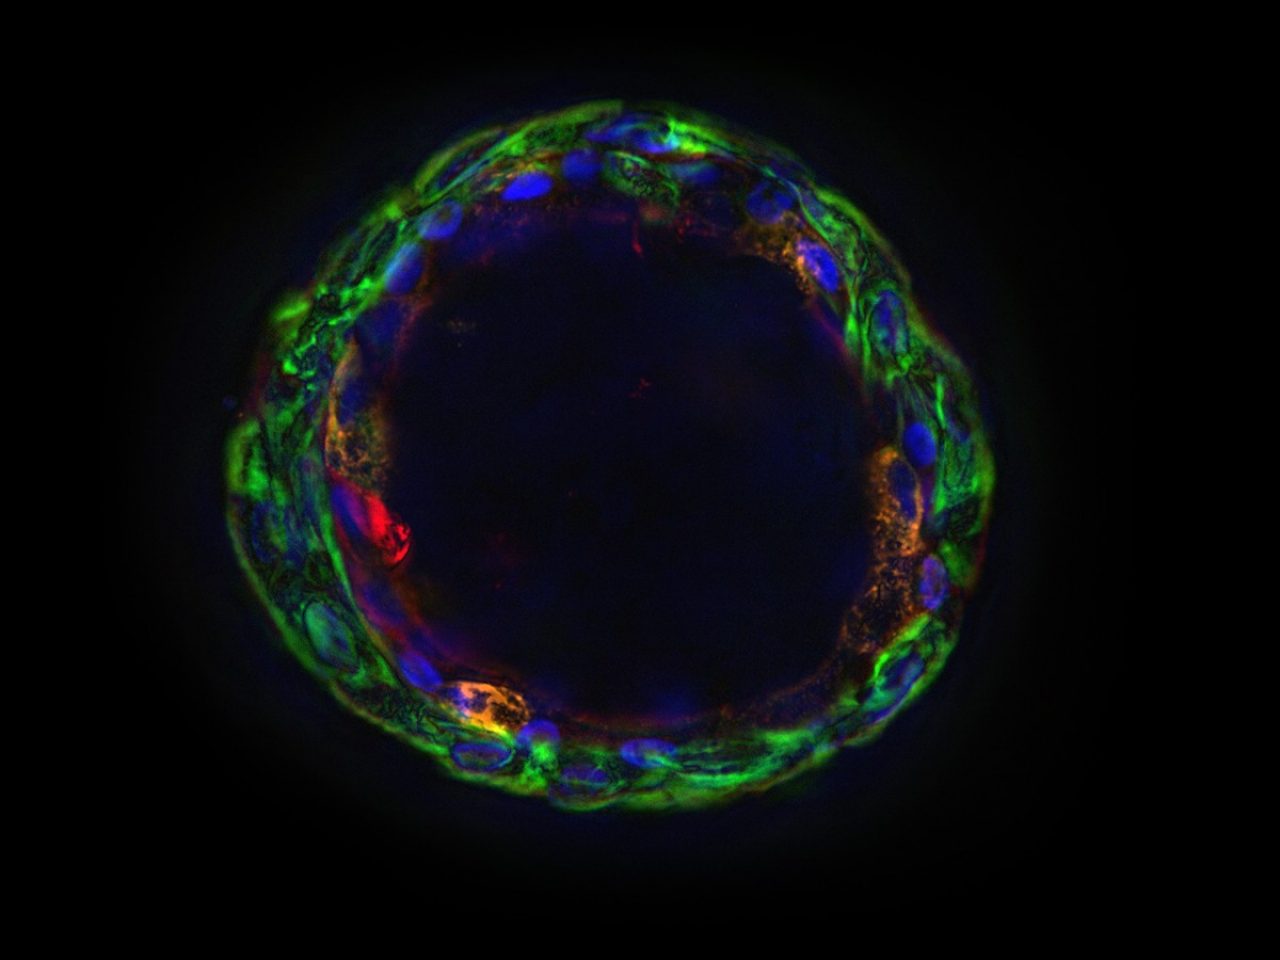 A spherical cell with a hollow center on a black background